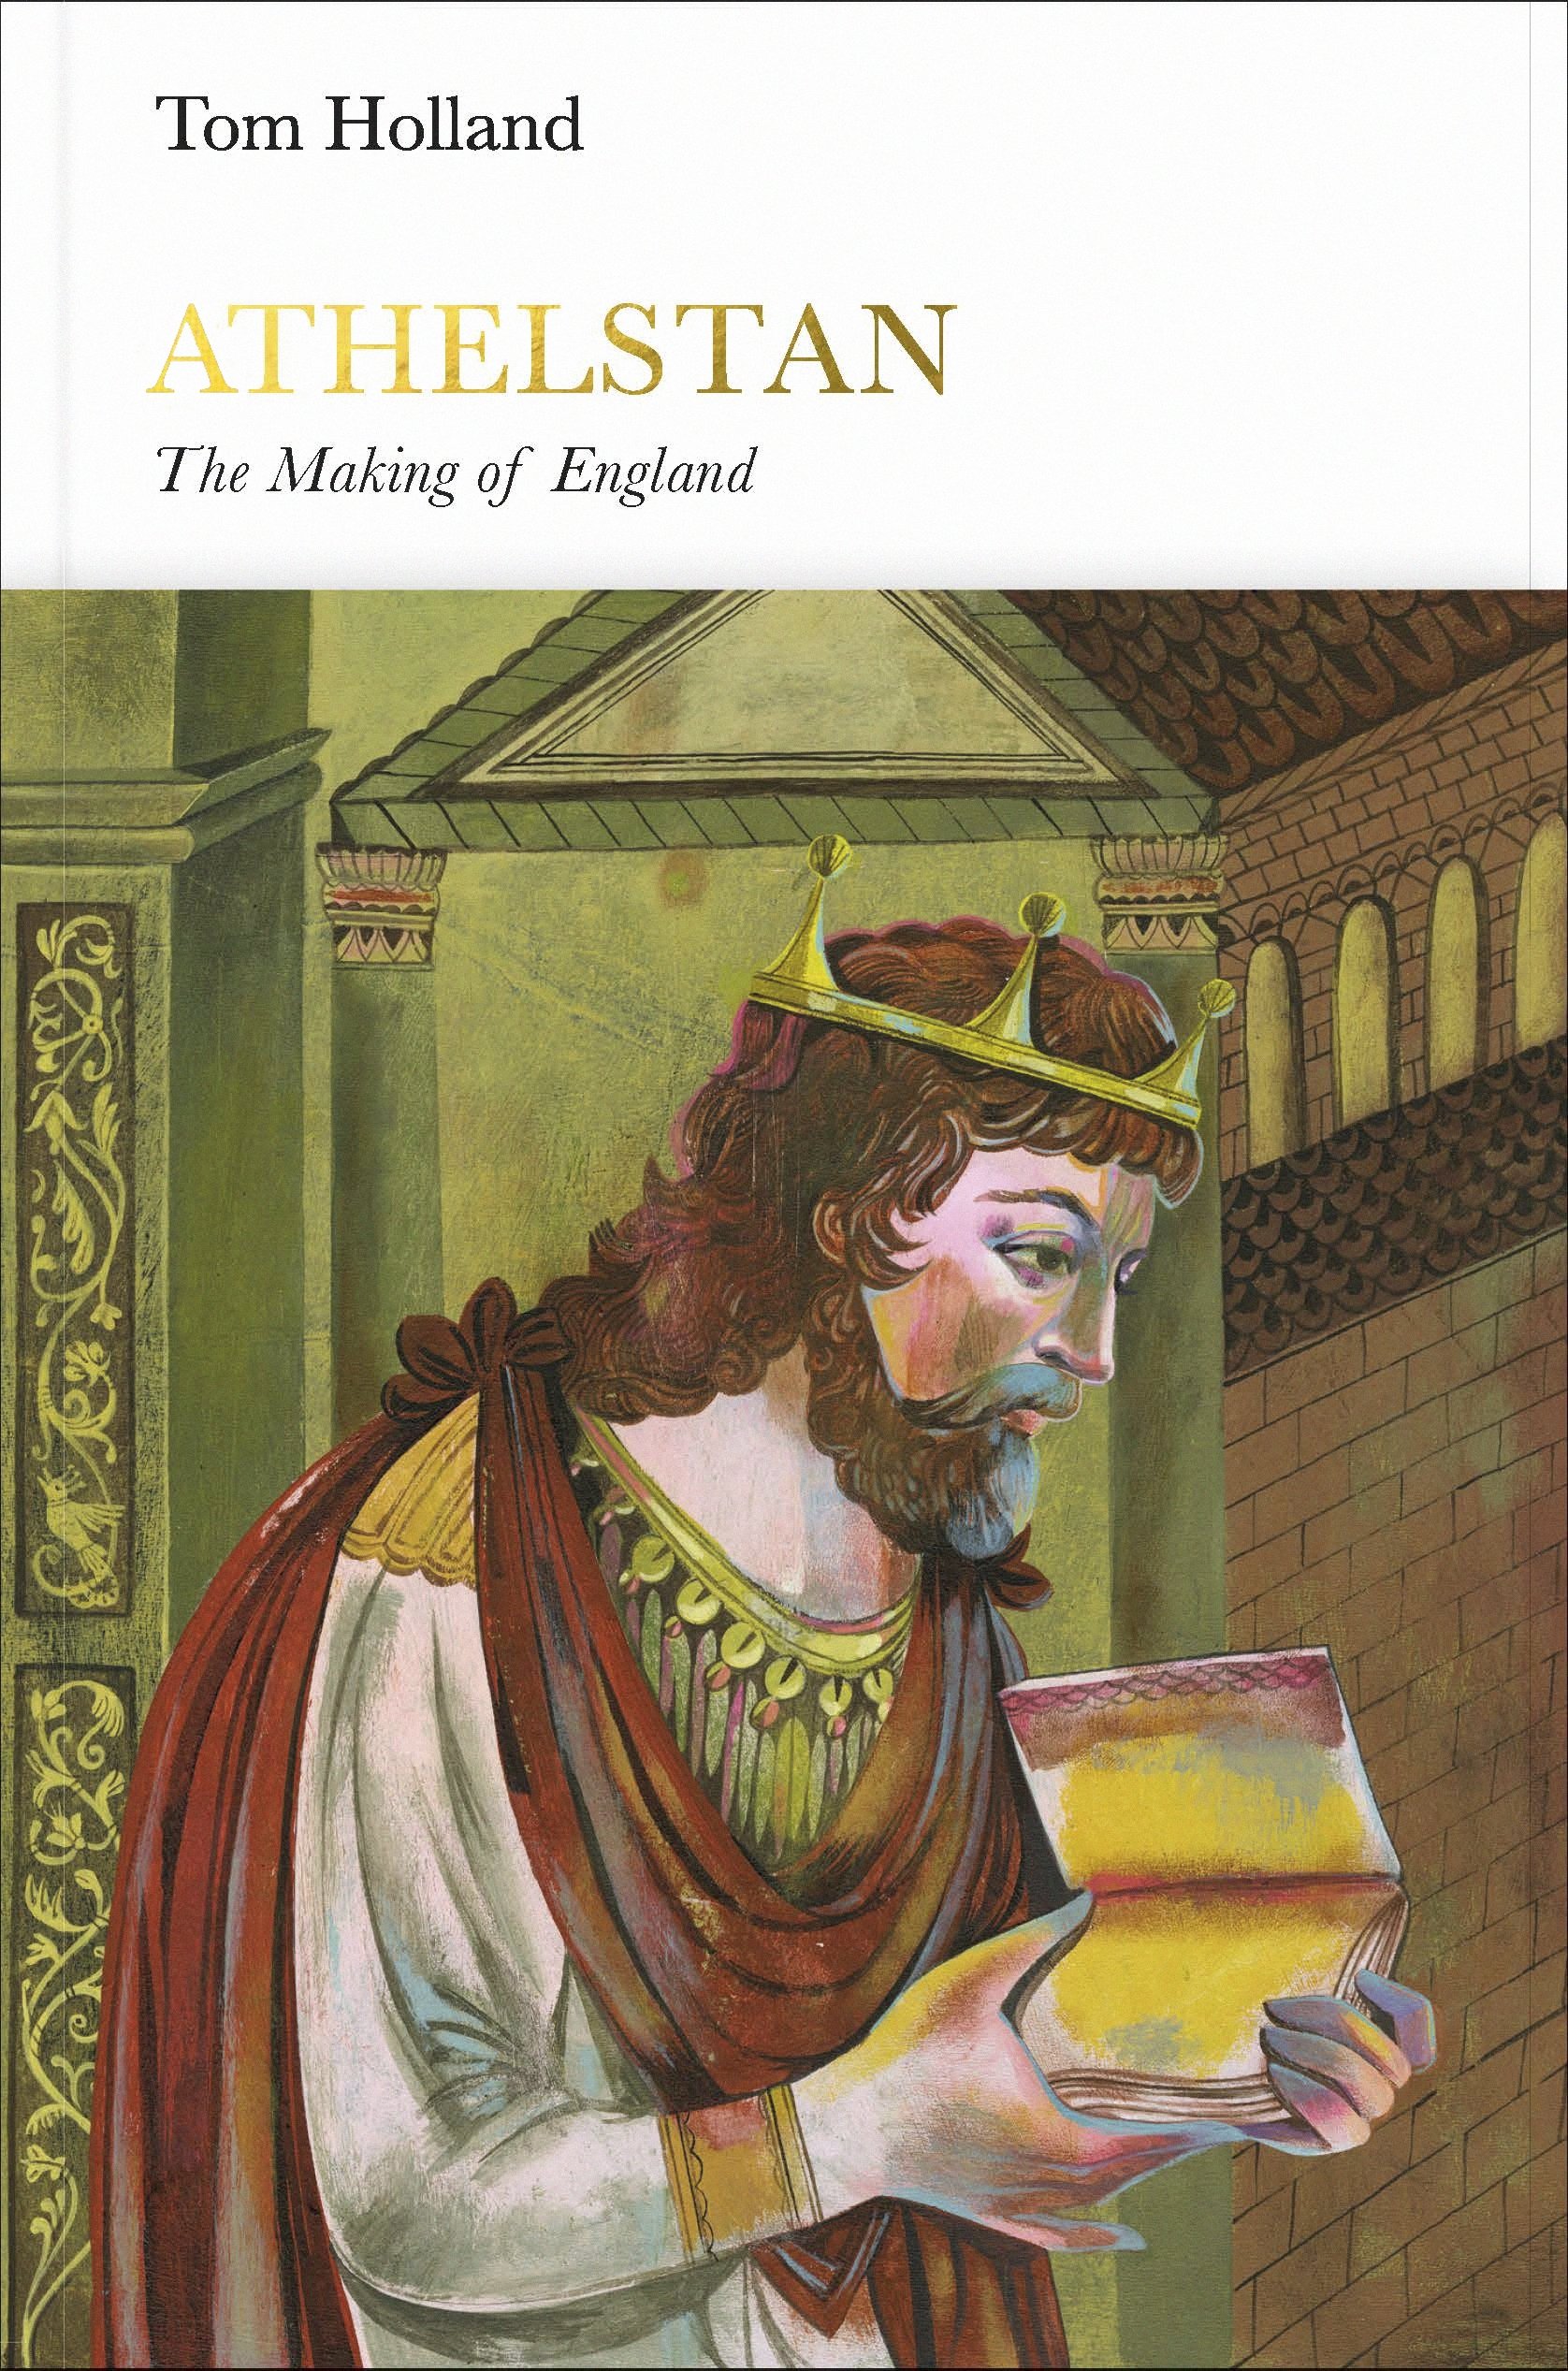 Athelstan: The Making of England